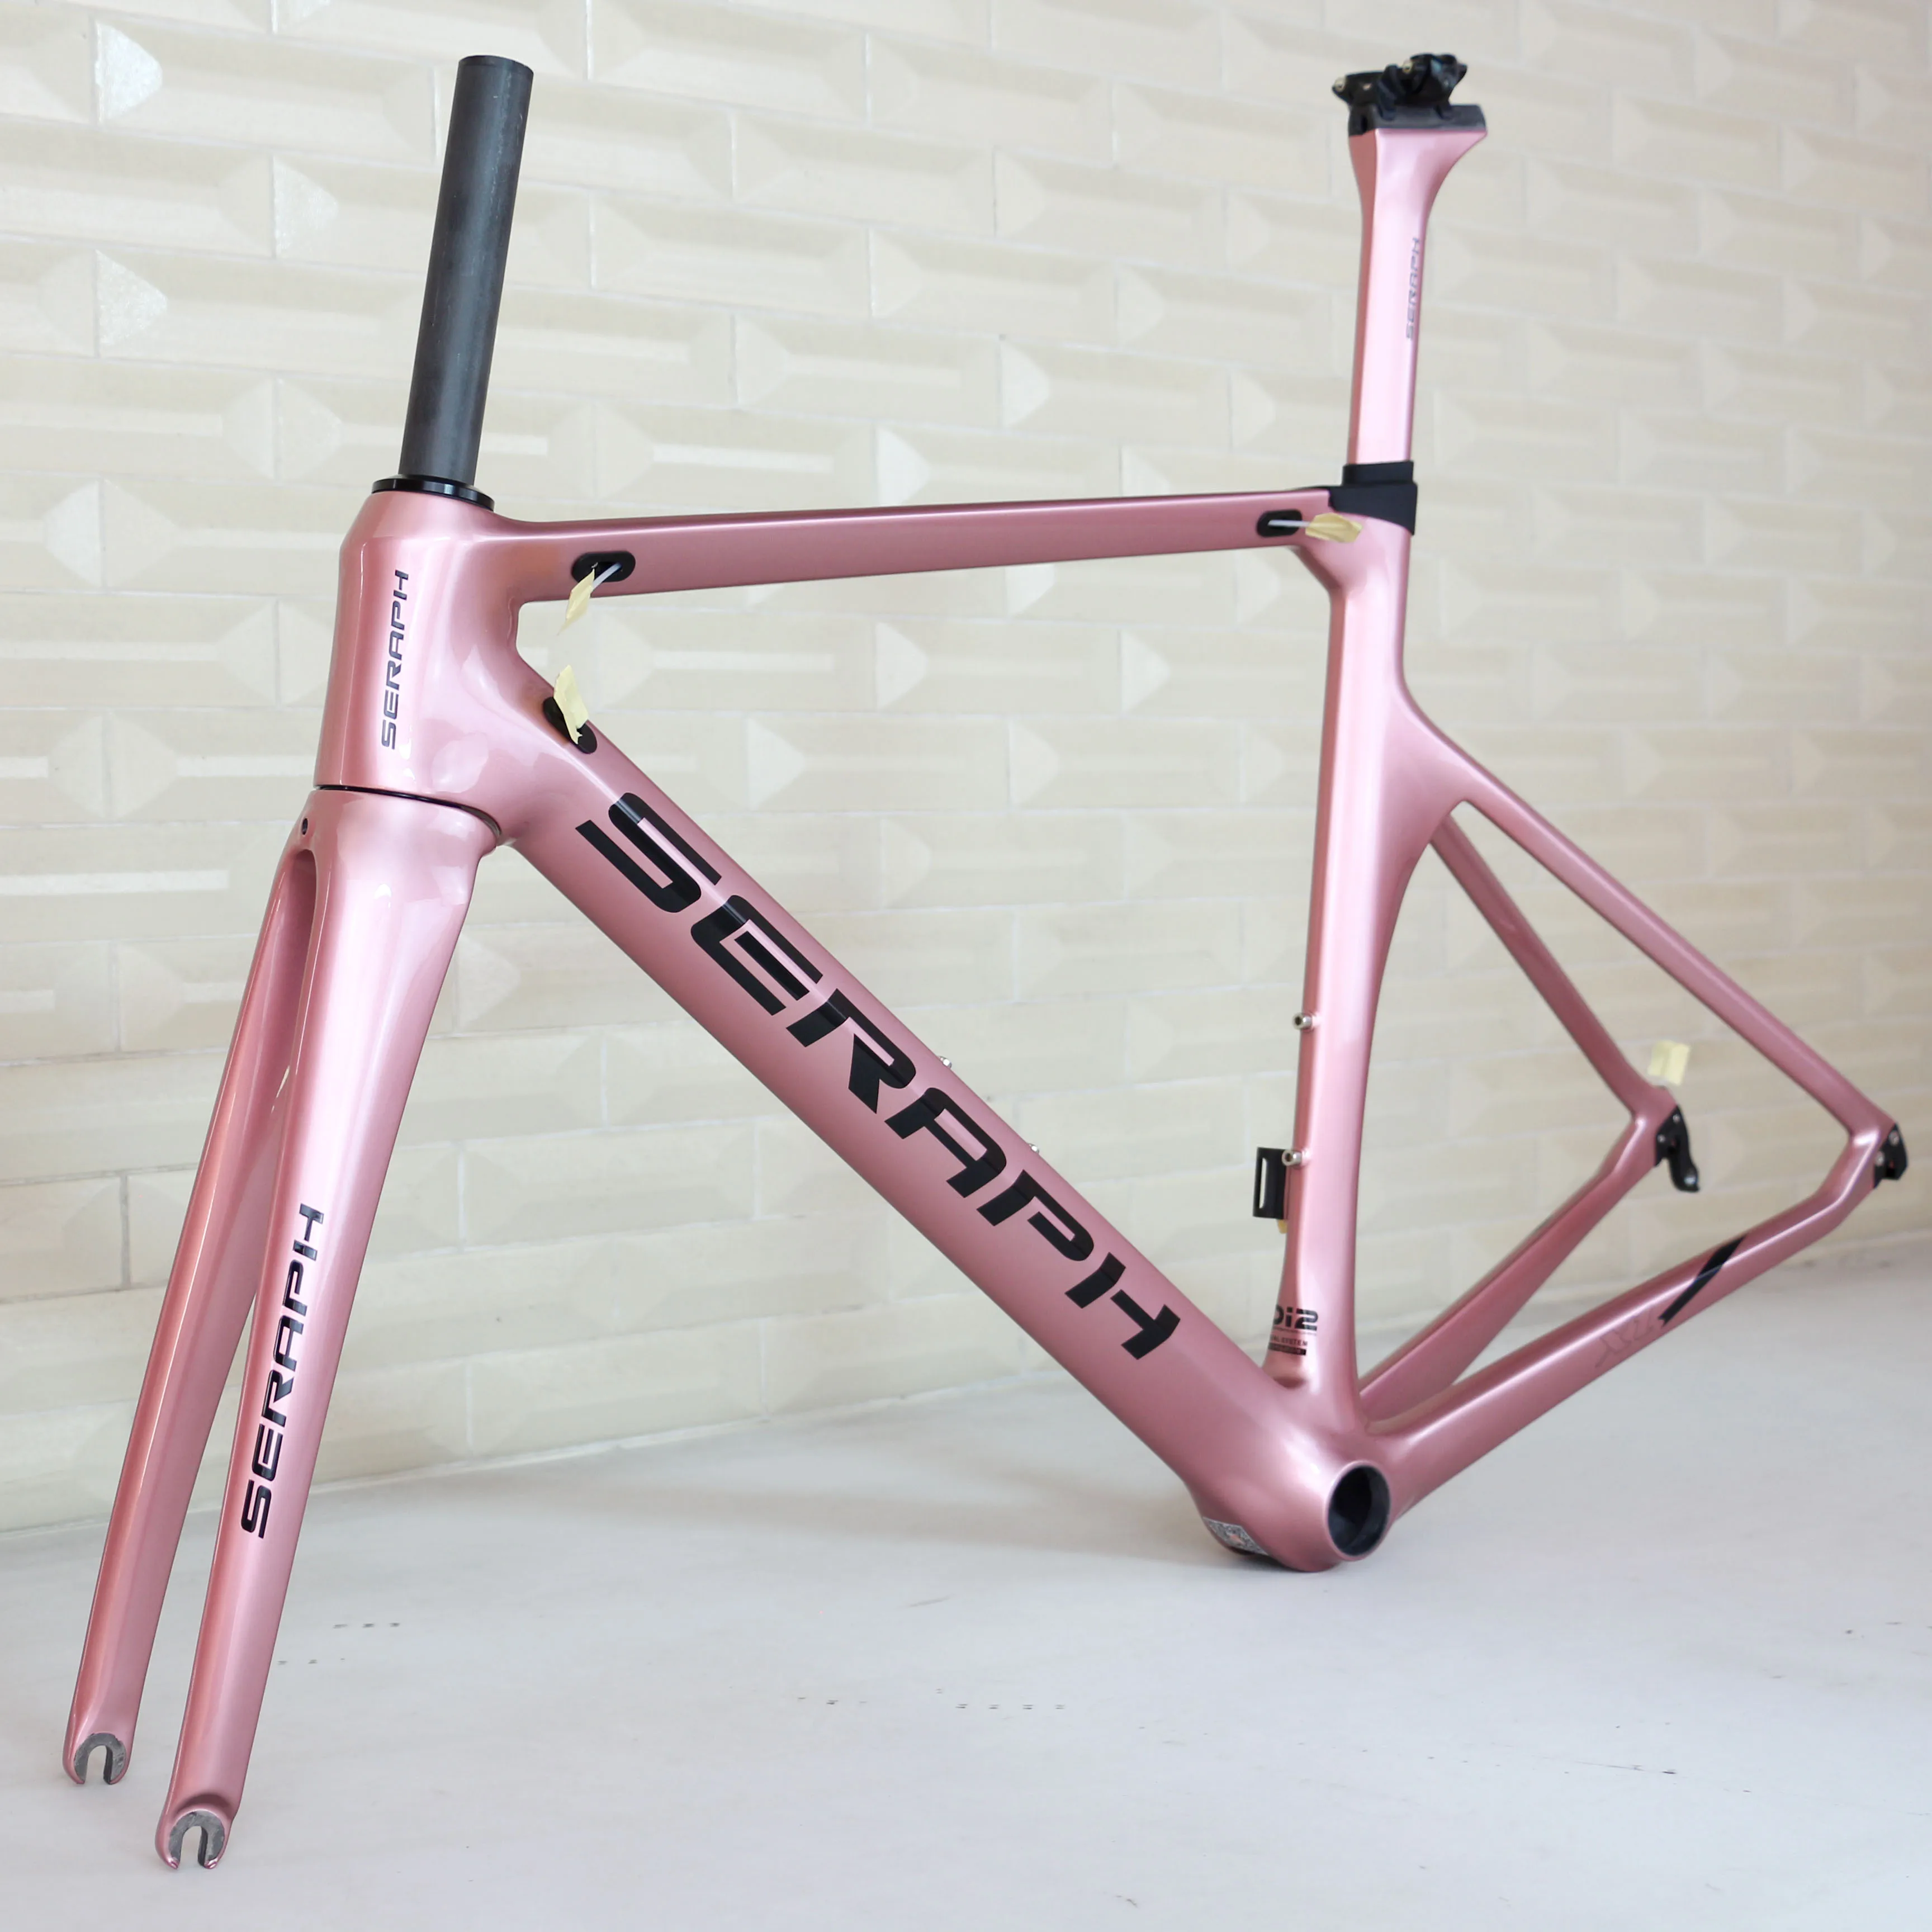 carbon road bicycle frames